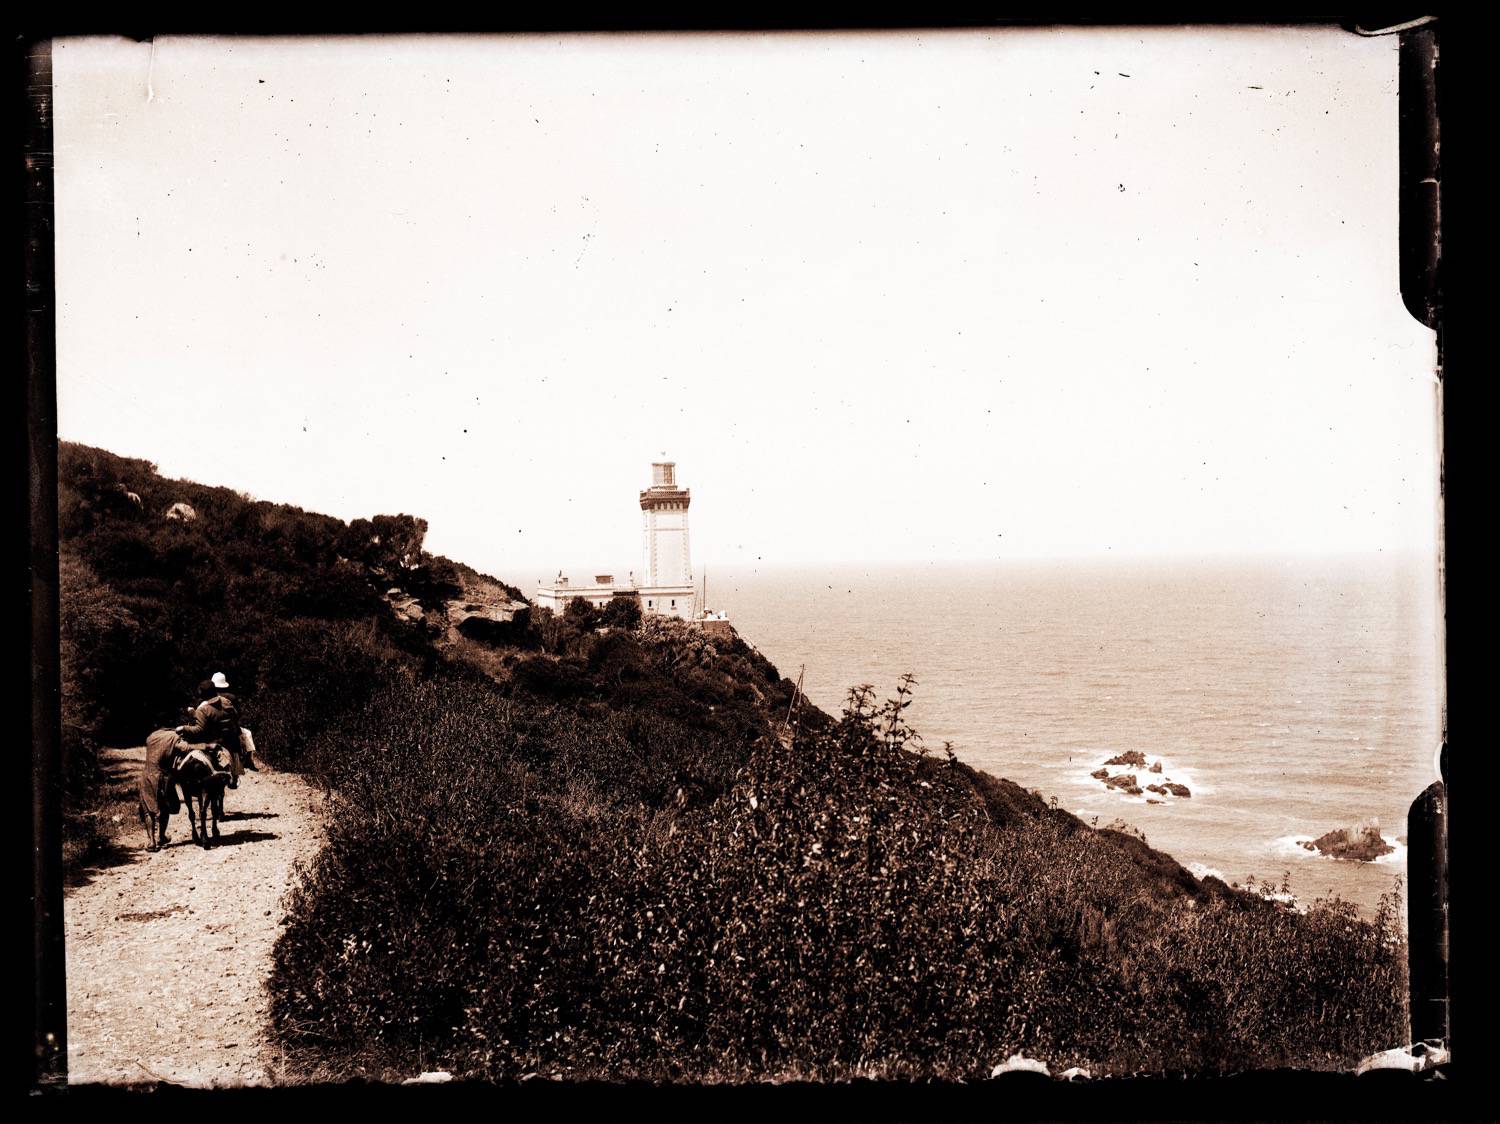 View of the lighthouse from the approaching path